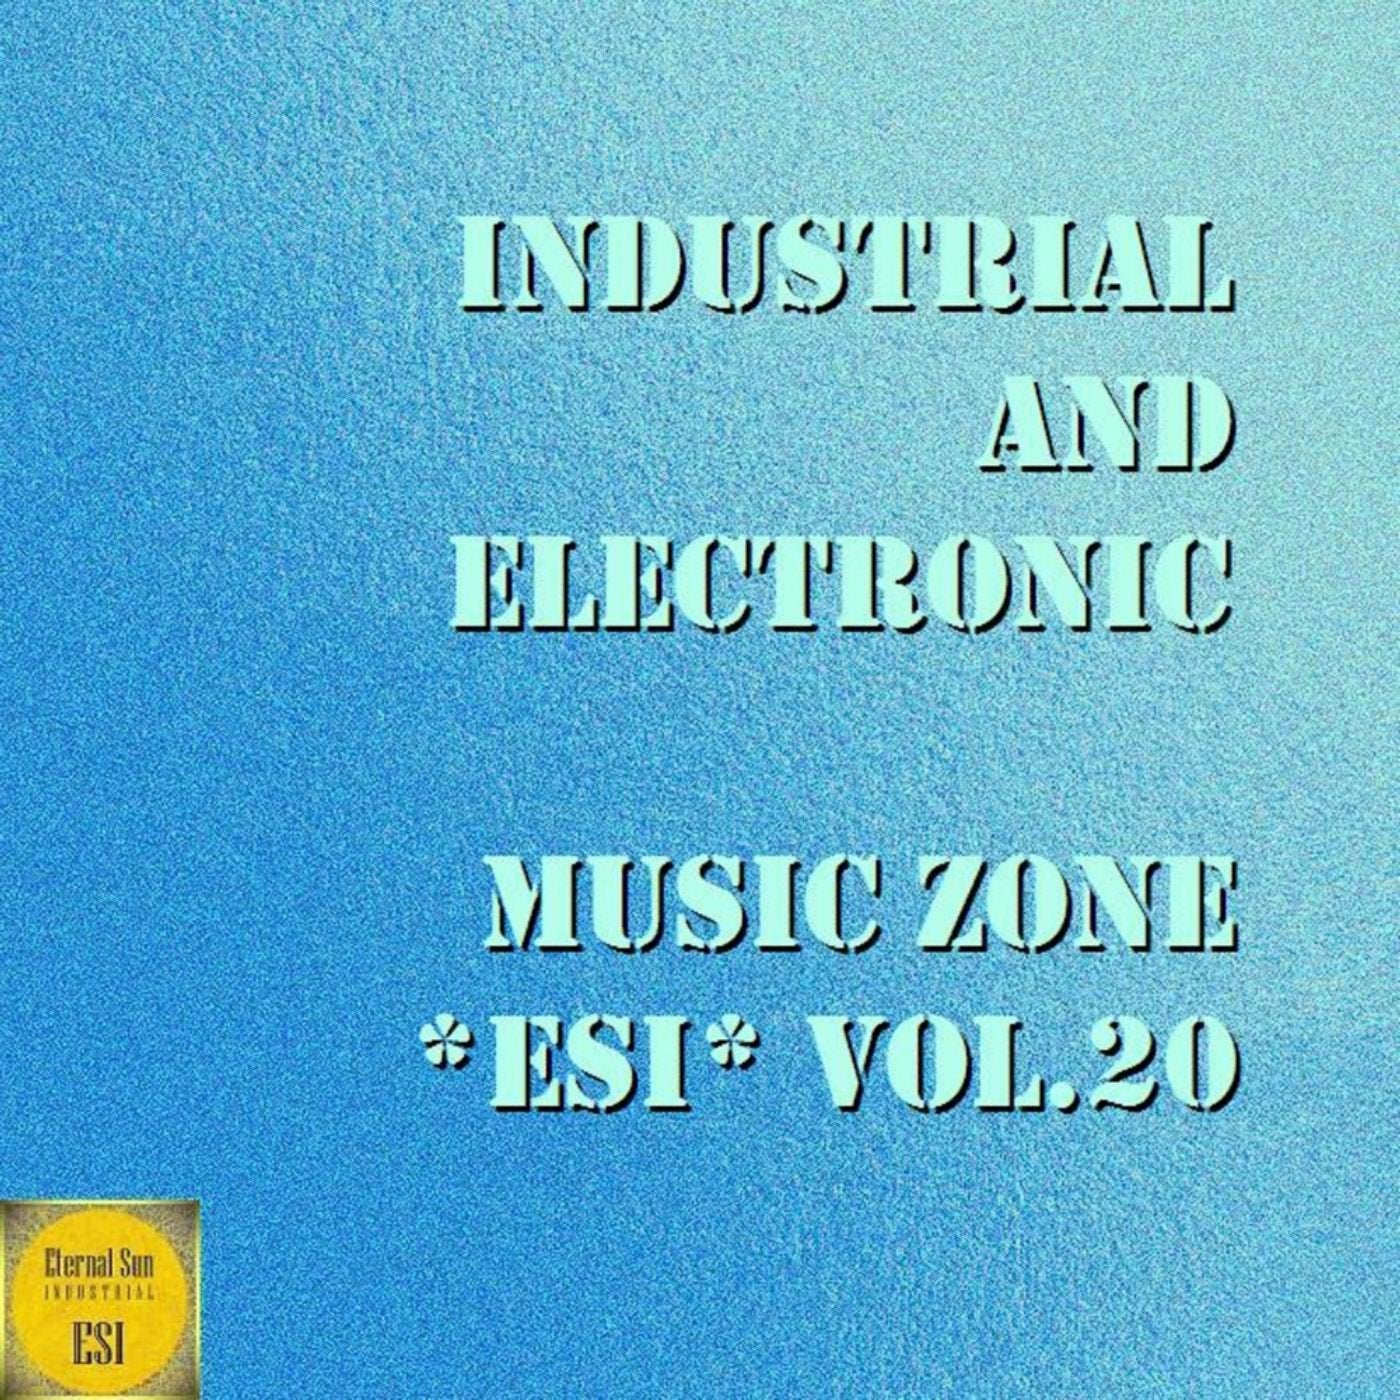 Industrial & Electronic: Music Zone Esi, Vol. 20